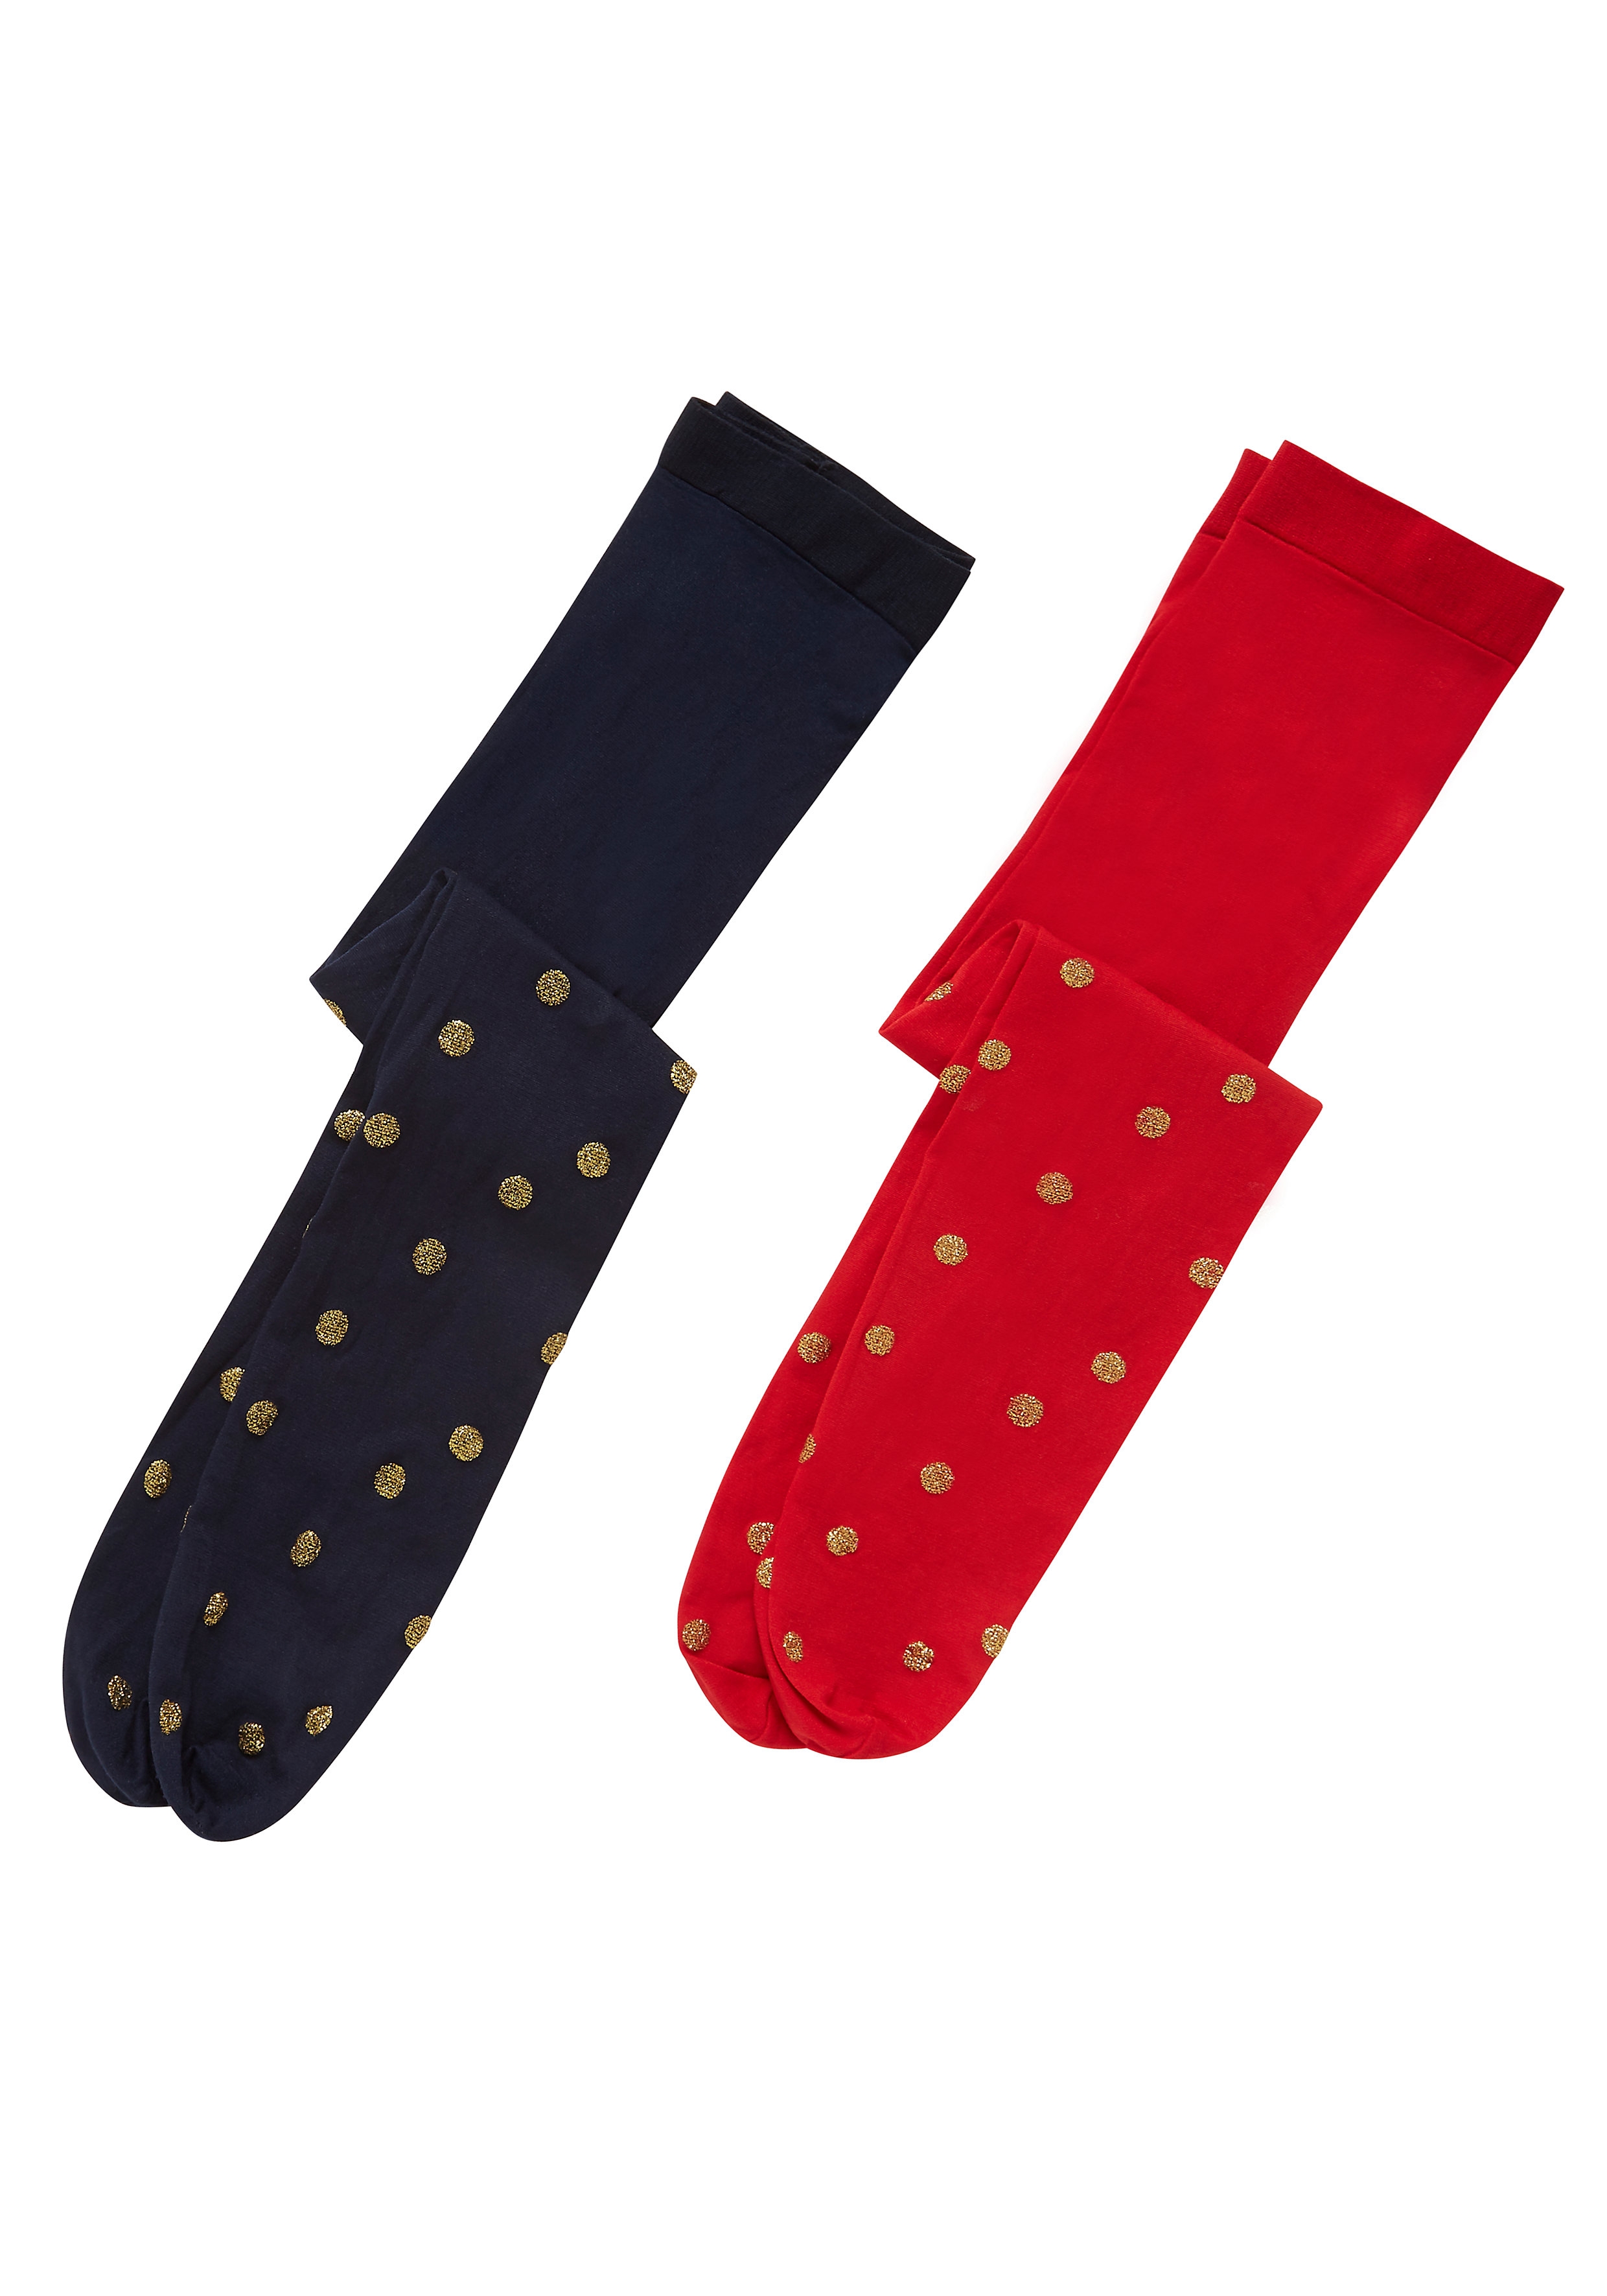 Mothercare | Girls Glitter Spot Tights - Pack Of 2 - Multicolor